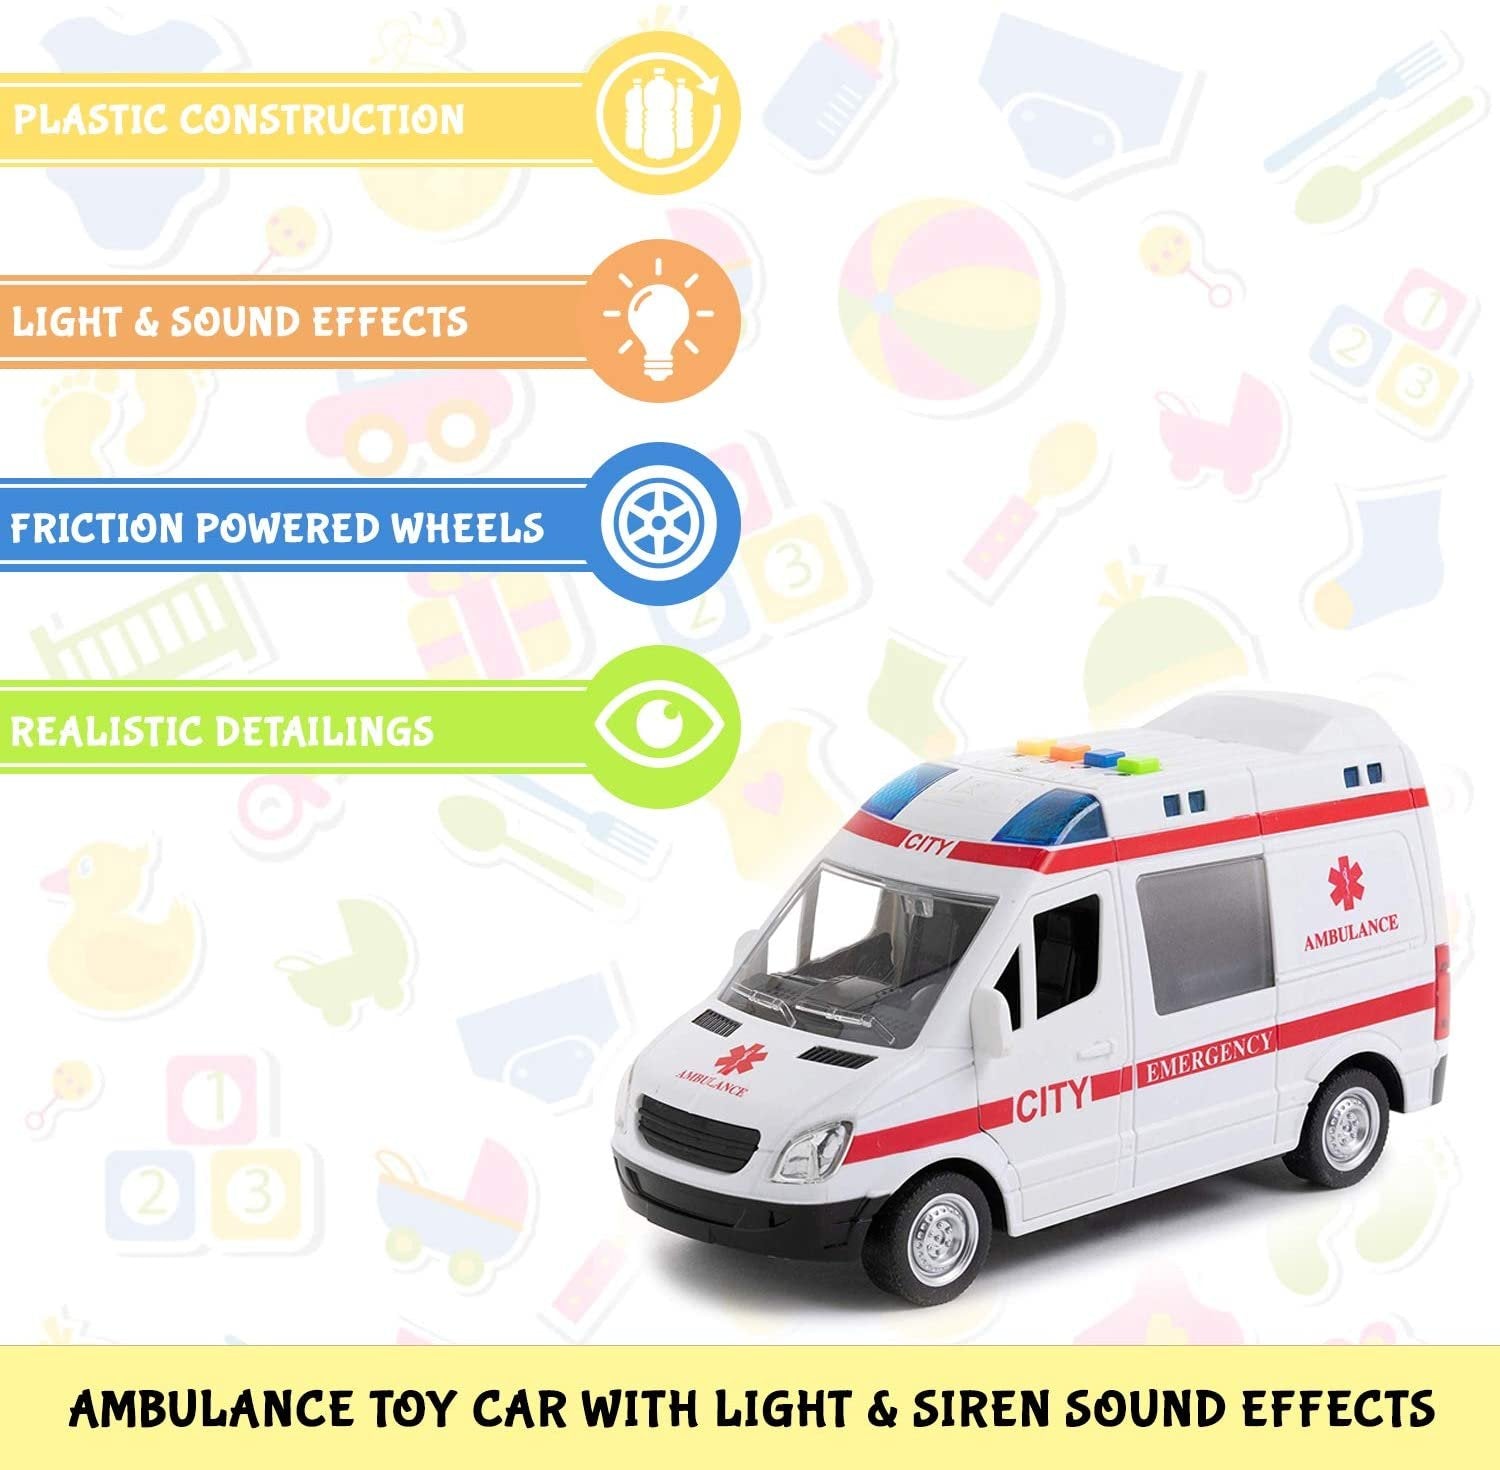 Ambulance Toy Car with Light & Siren Sound Effects - Friction Powered Wheels & LED Lights - Heavy Duty Plastic Rescue Vehicle Toy for Kids & Children by Toy To Enjoy